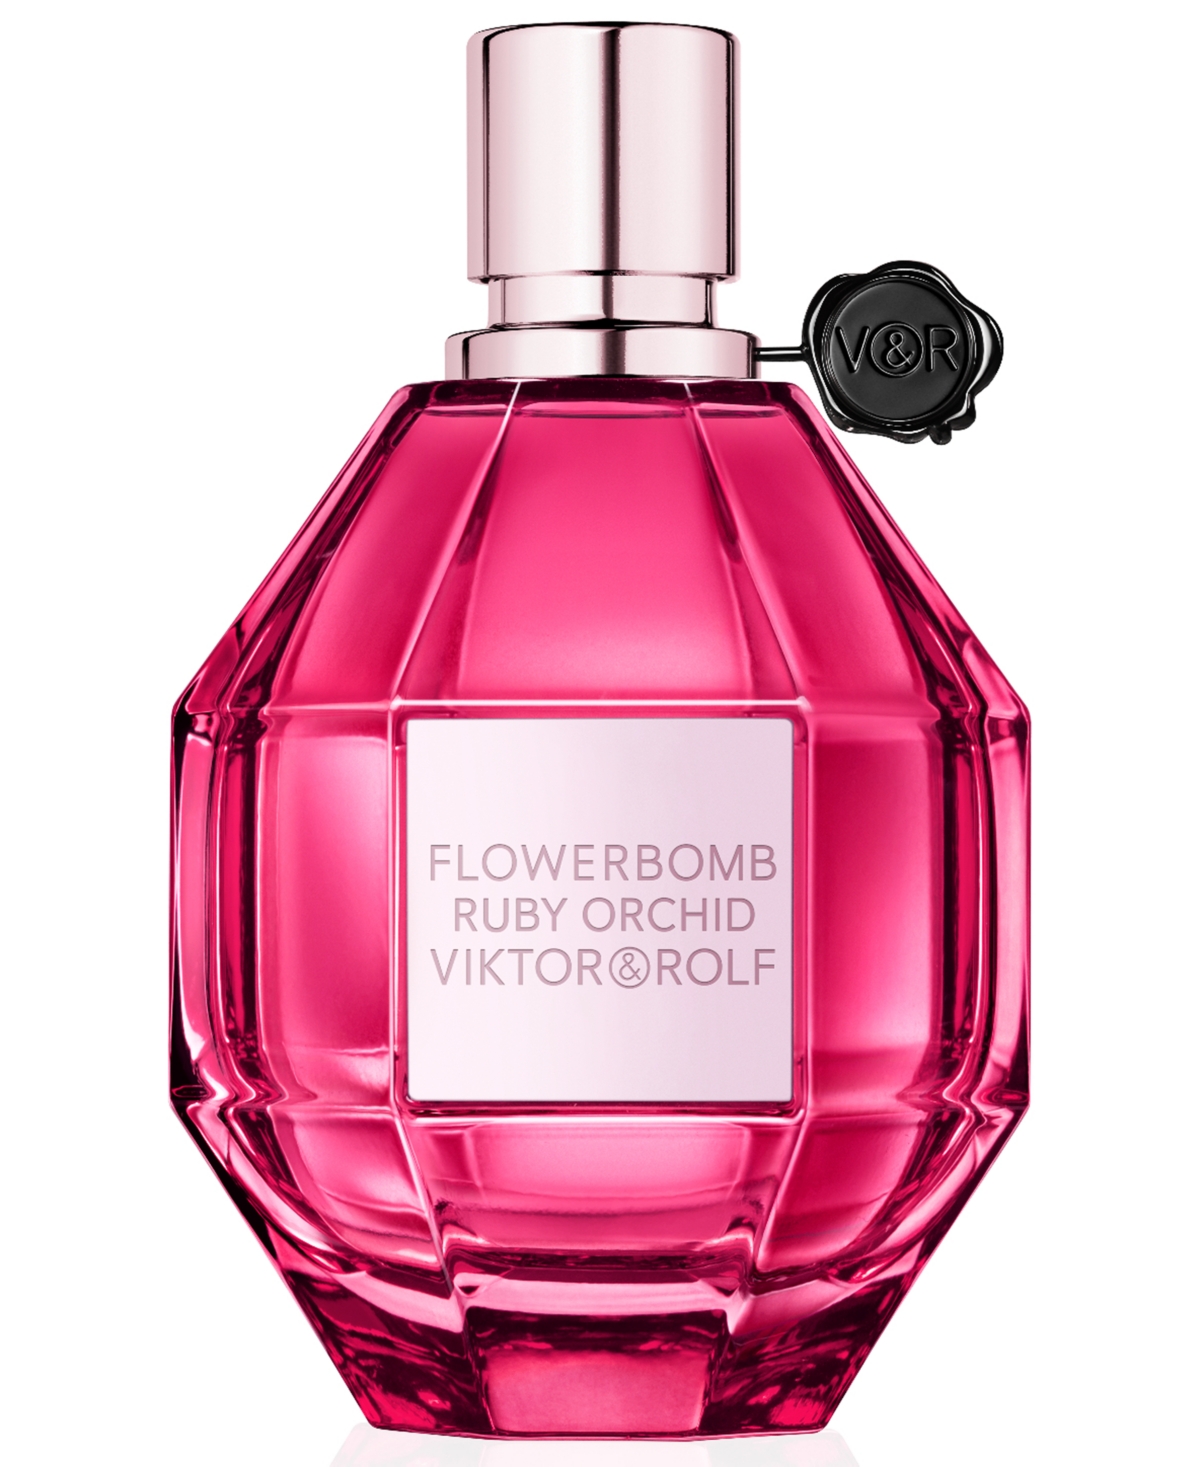 Viktor & Rolf Flowerbomb Ruby Orchid Eau De Parfum, 5.04 Oz., Created For Macy's In No Color